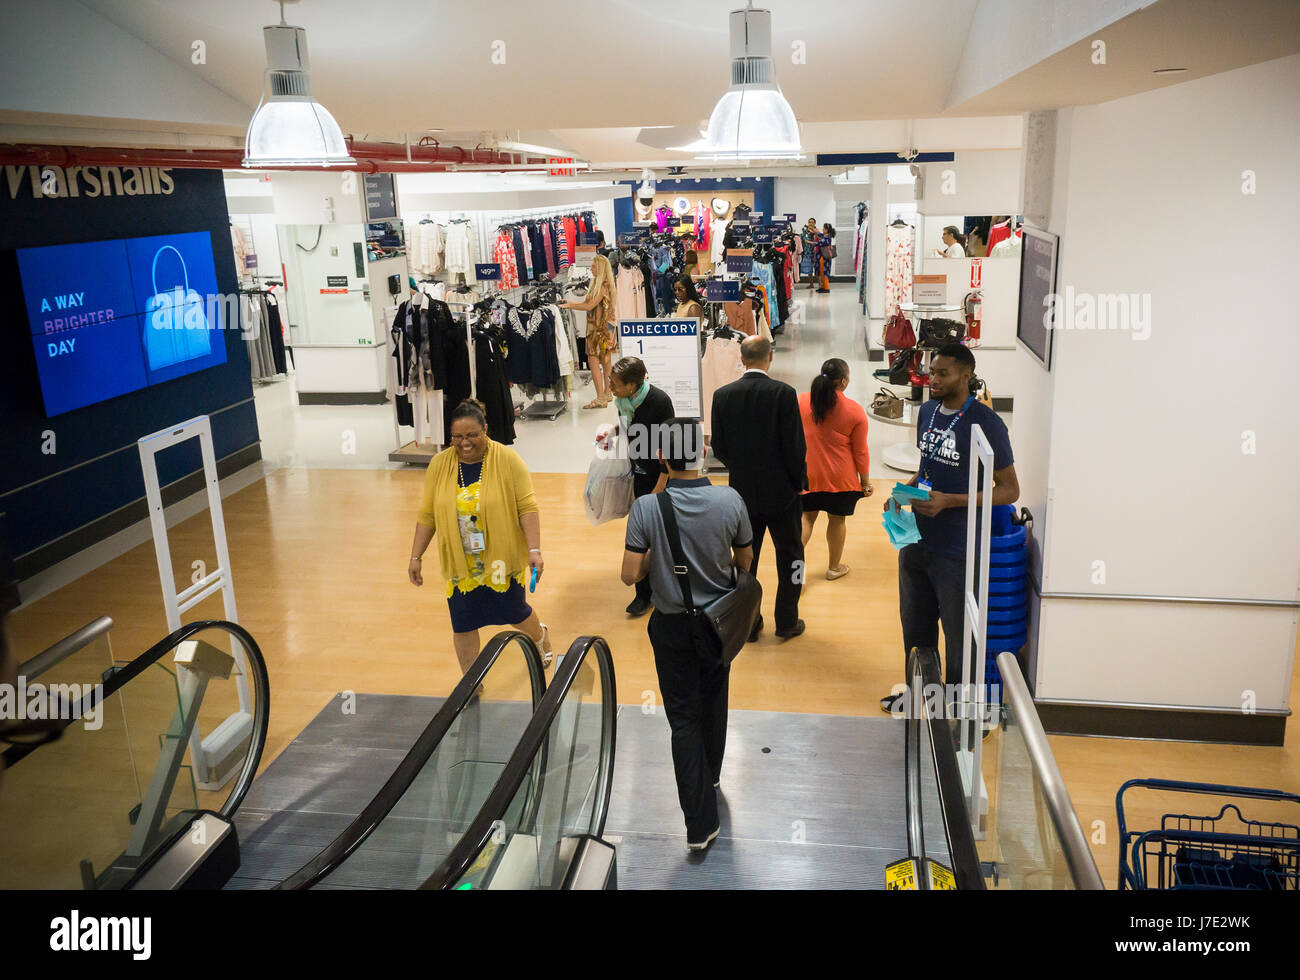 Customers in the brand new Marshalls store in Lower Manhattan in New ...